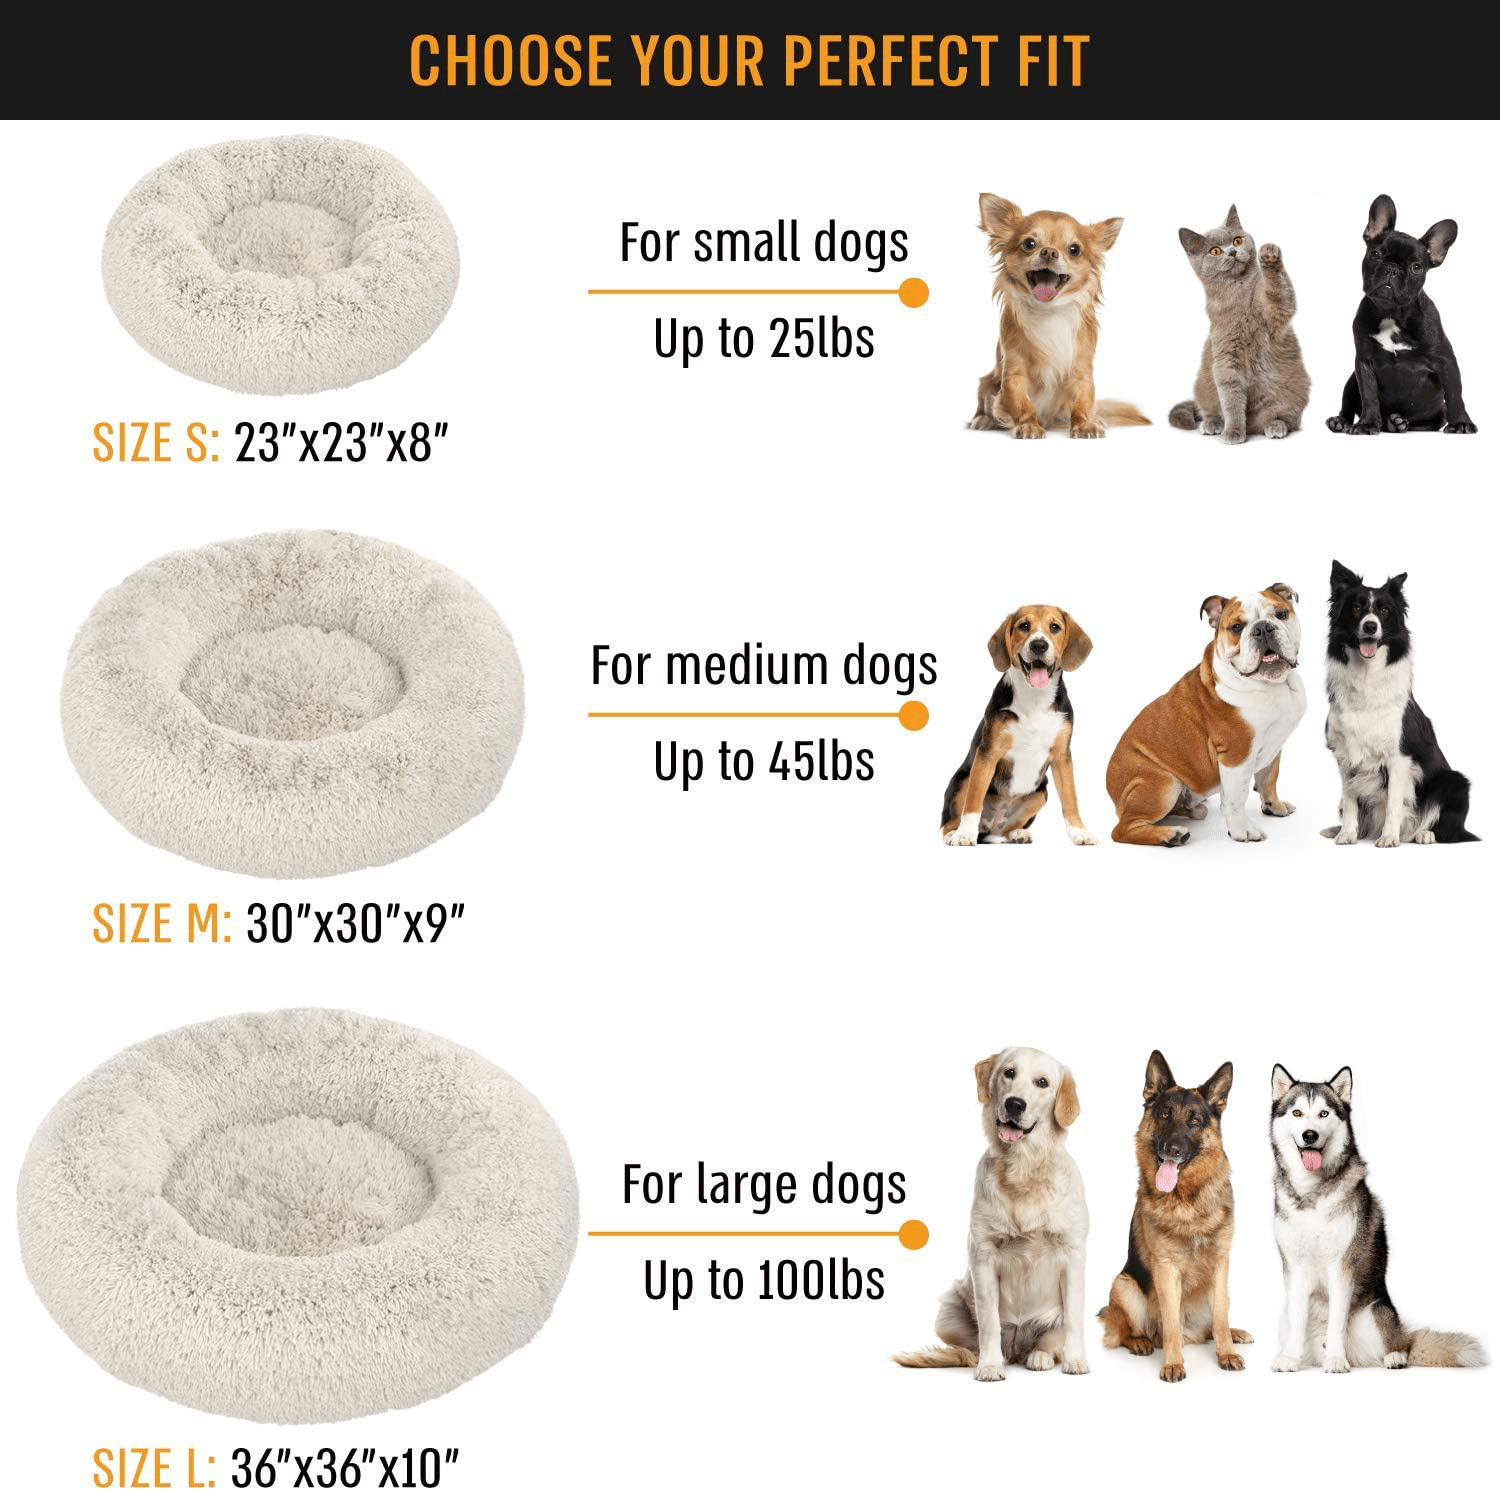 Active Pets Plush Calming Dog Bed, Donut Dog Bed for Small Dogs, Medium & Large, anti Anxiety Dog Bed, Soft Fuzzy Calming Bed for Dogs & Cats, Comfy Cat Bed, Marshmallow Cuddler Nest Calming Pet Bed Animals & Pet Supplies > Pet Supplies > Dog Supplies > Dog Beds Active Pets   